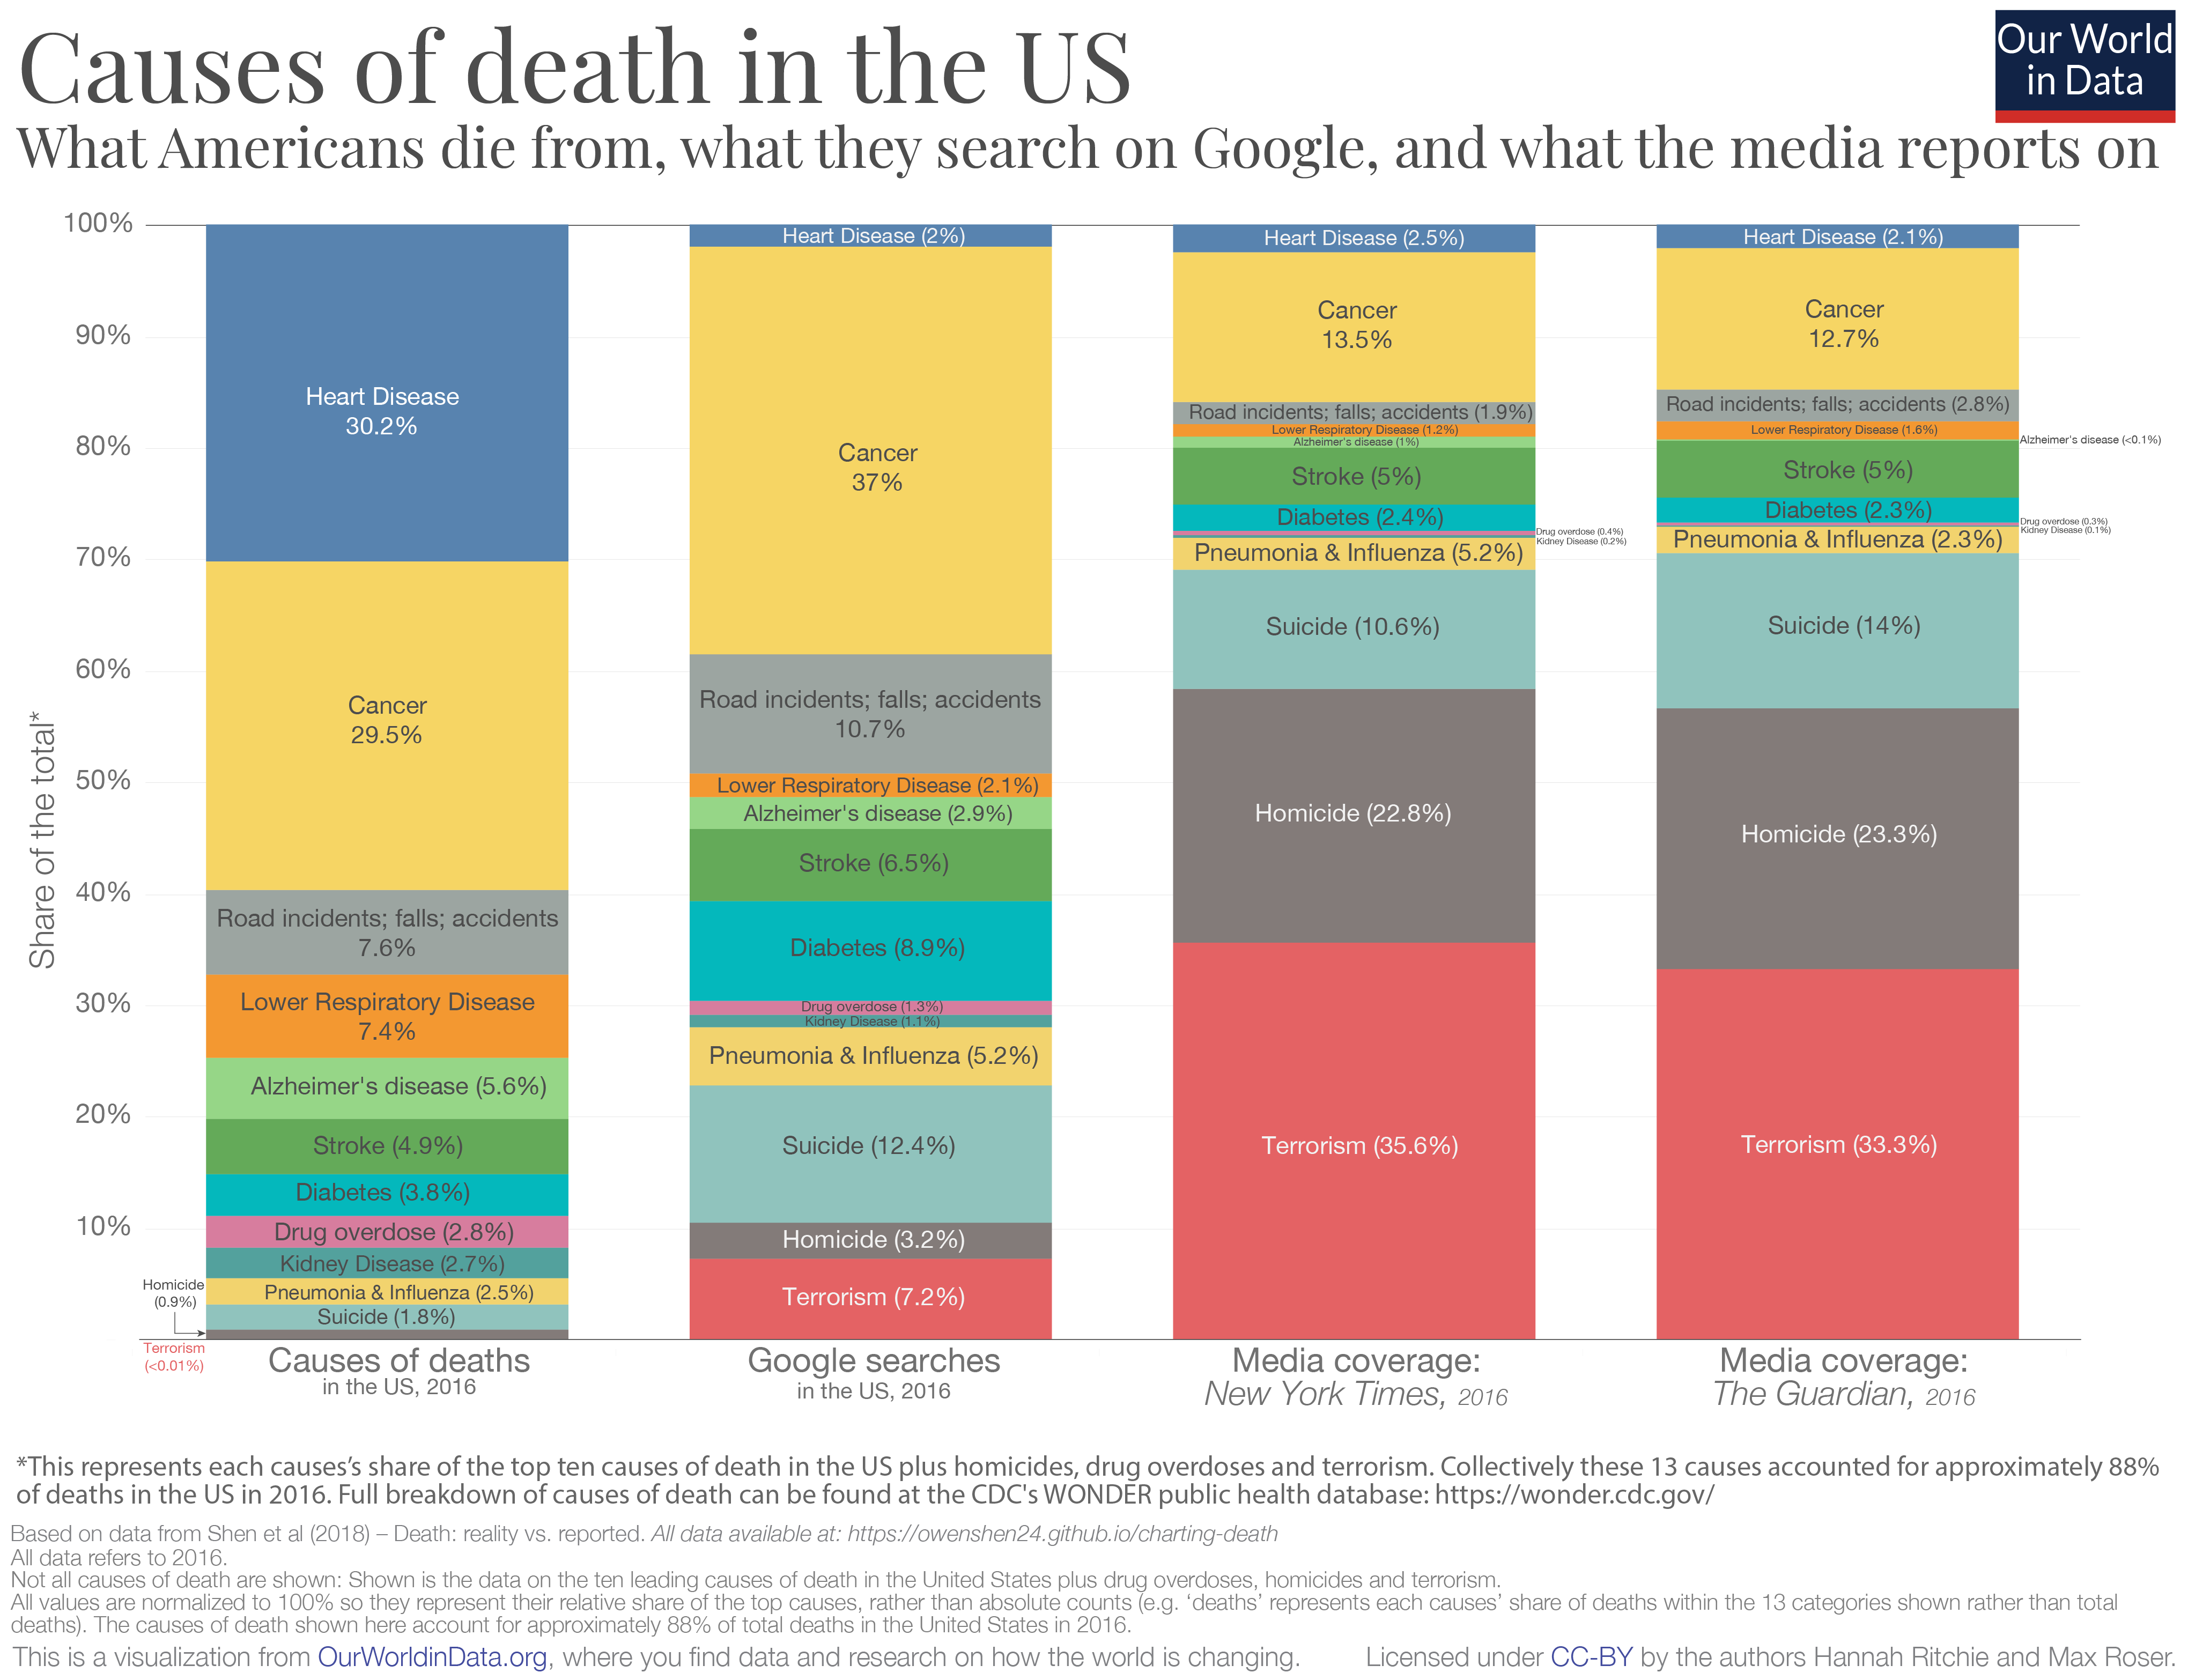 Causes of death in usa vs. media coverage